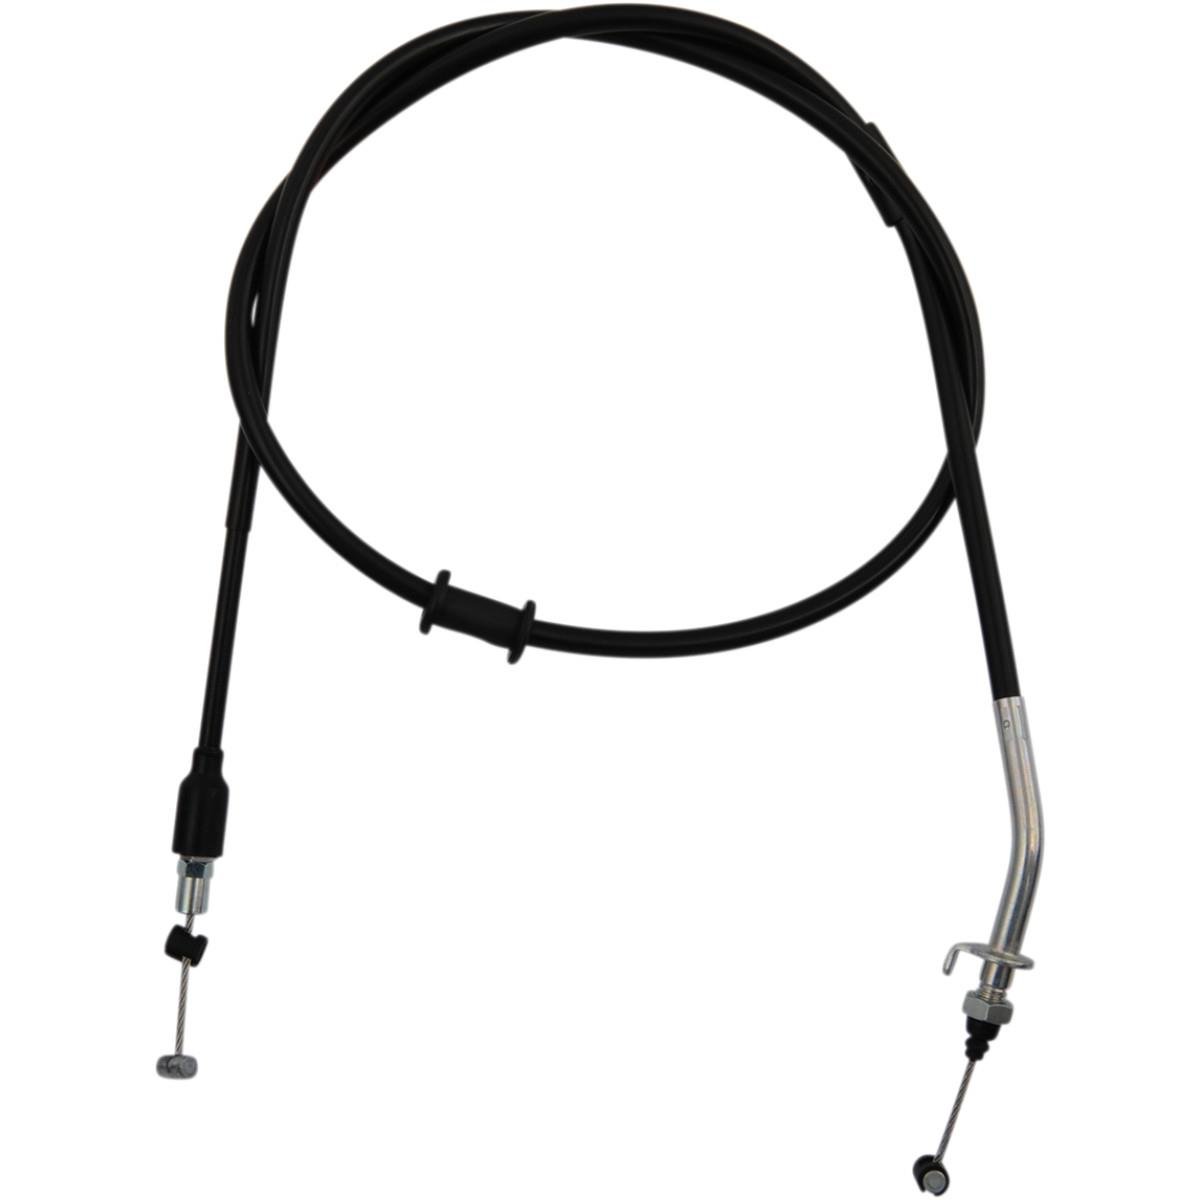 Moose Racing Clutch Cable  Yamaha YZF 250 '19, YZF 450 18-19